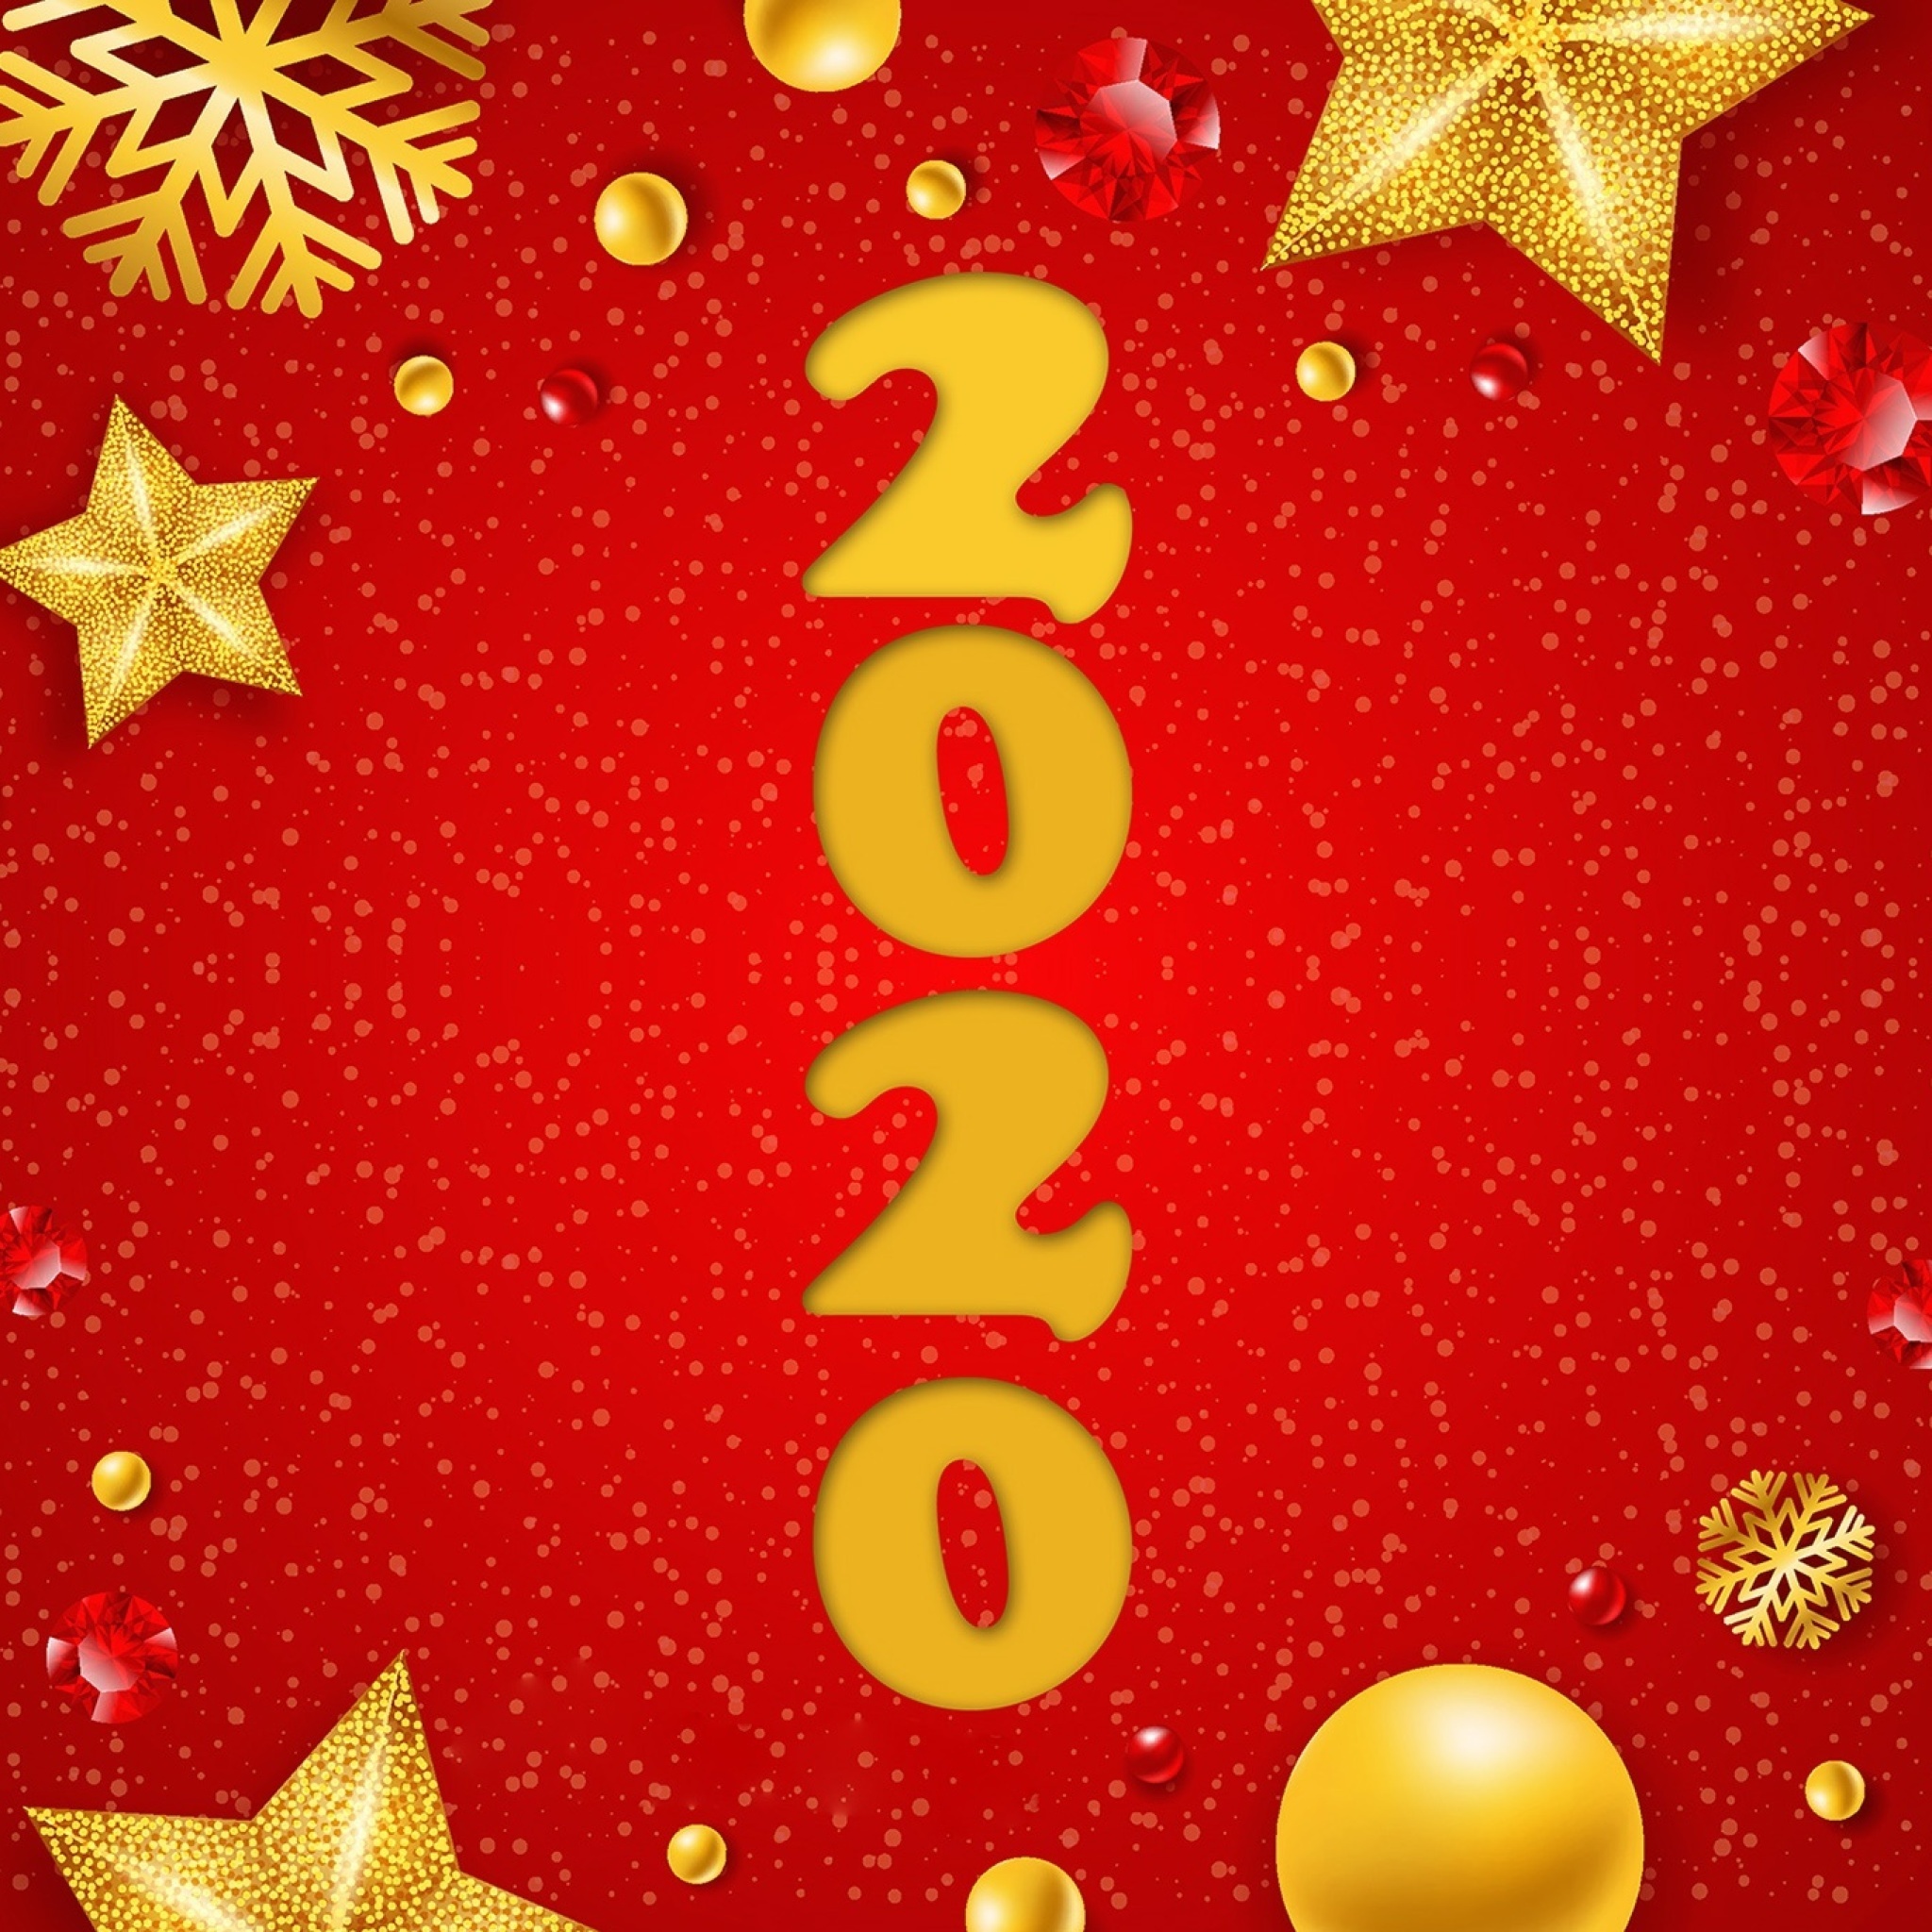 Happy New Year 2020 Messages screenshot #1 2048x2048